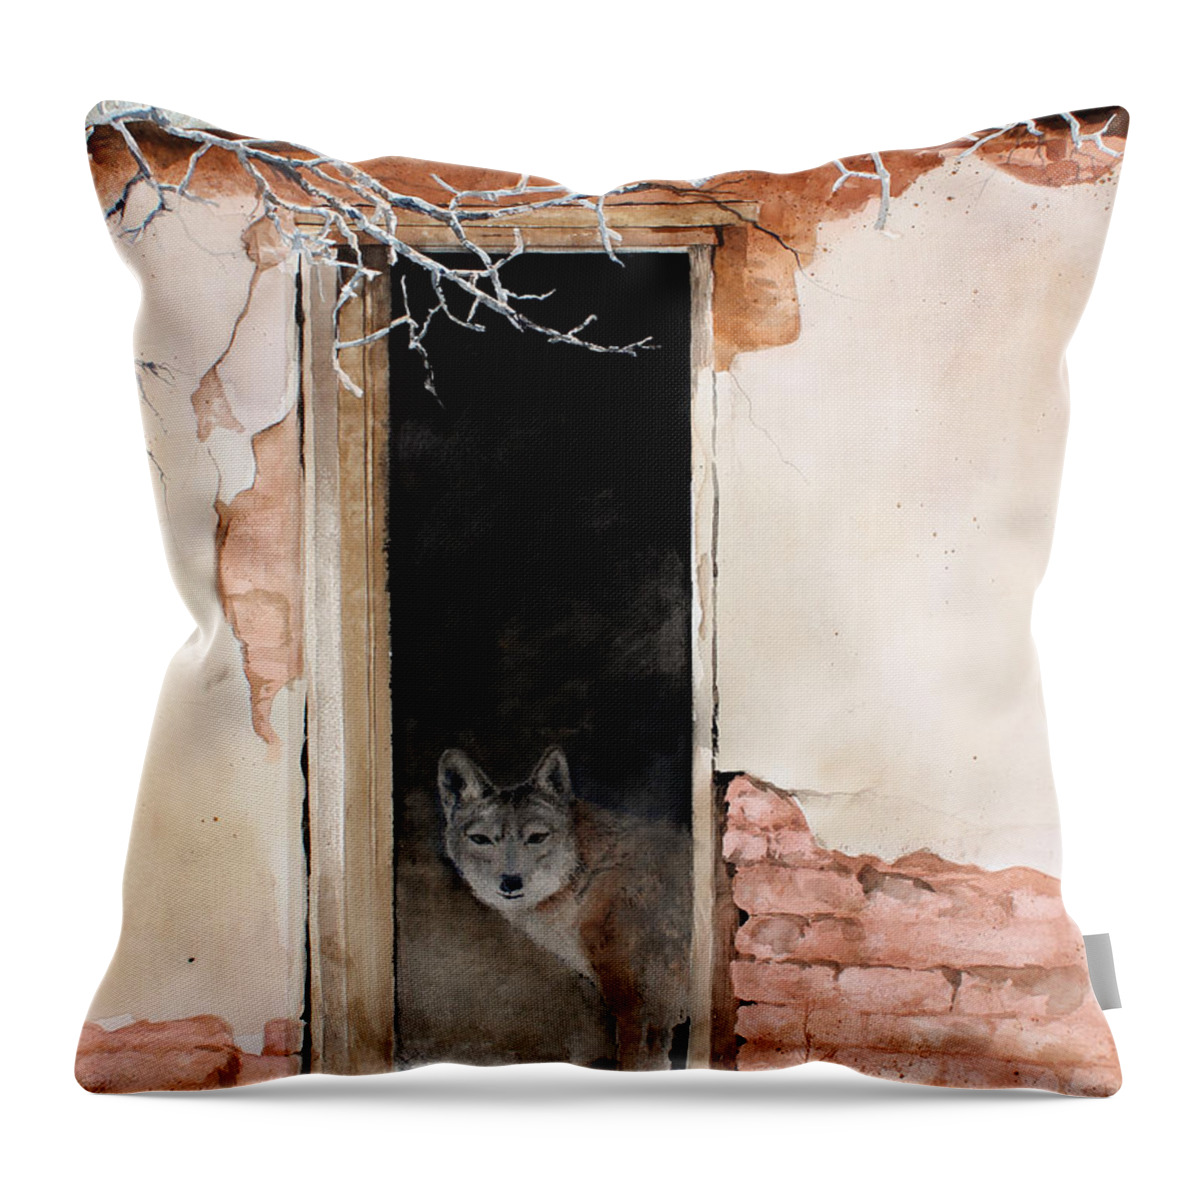 A Coyote Stands Inside The Doorway Of An Abandon Dwelling In A Deserted Town In New Mexico. Throw Pillow featuring the painting The New Tenent by Monte Toon